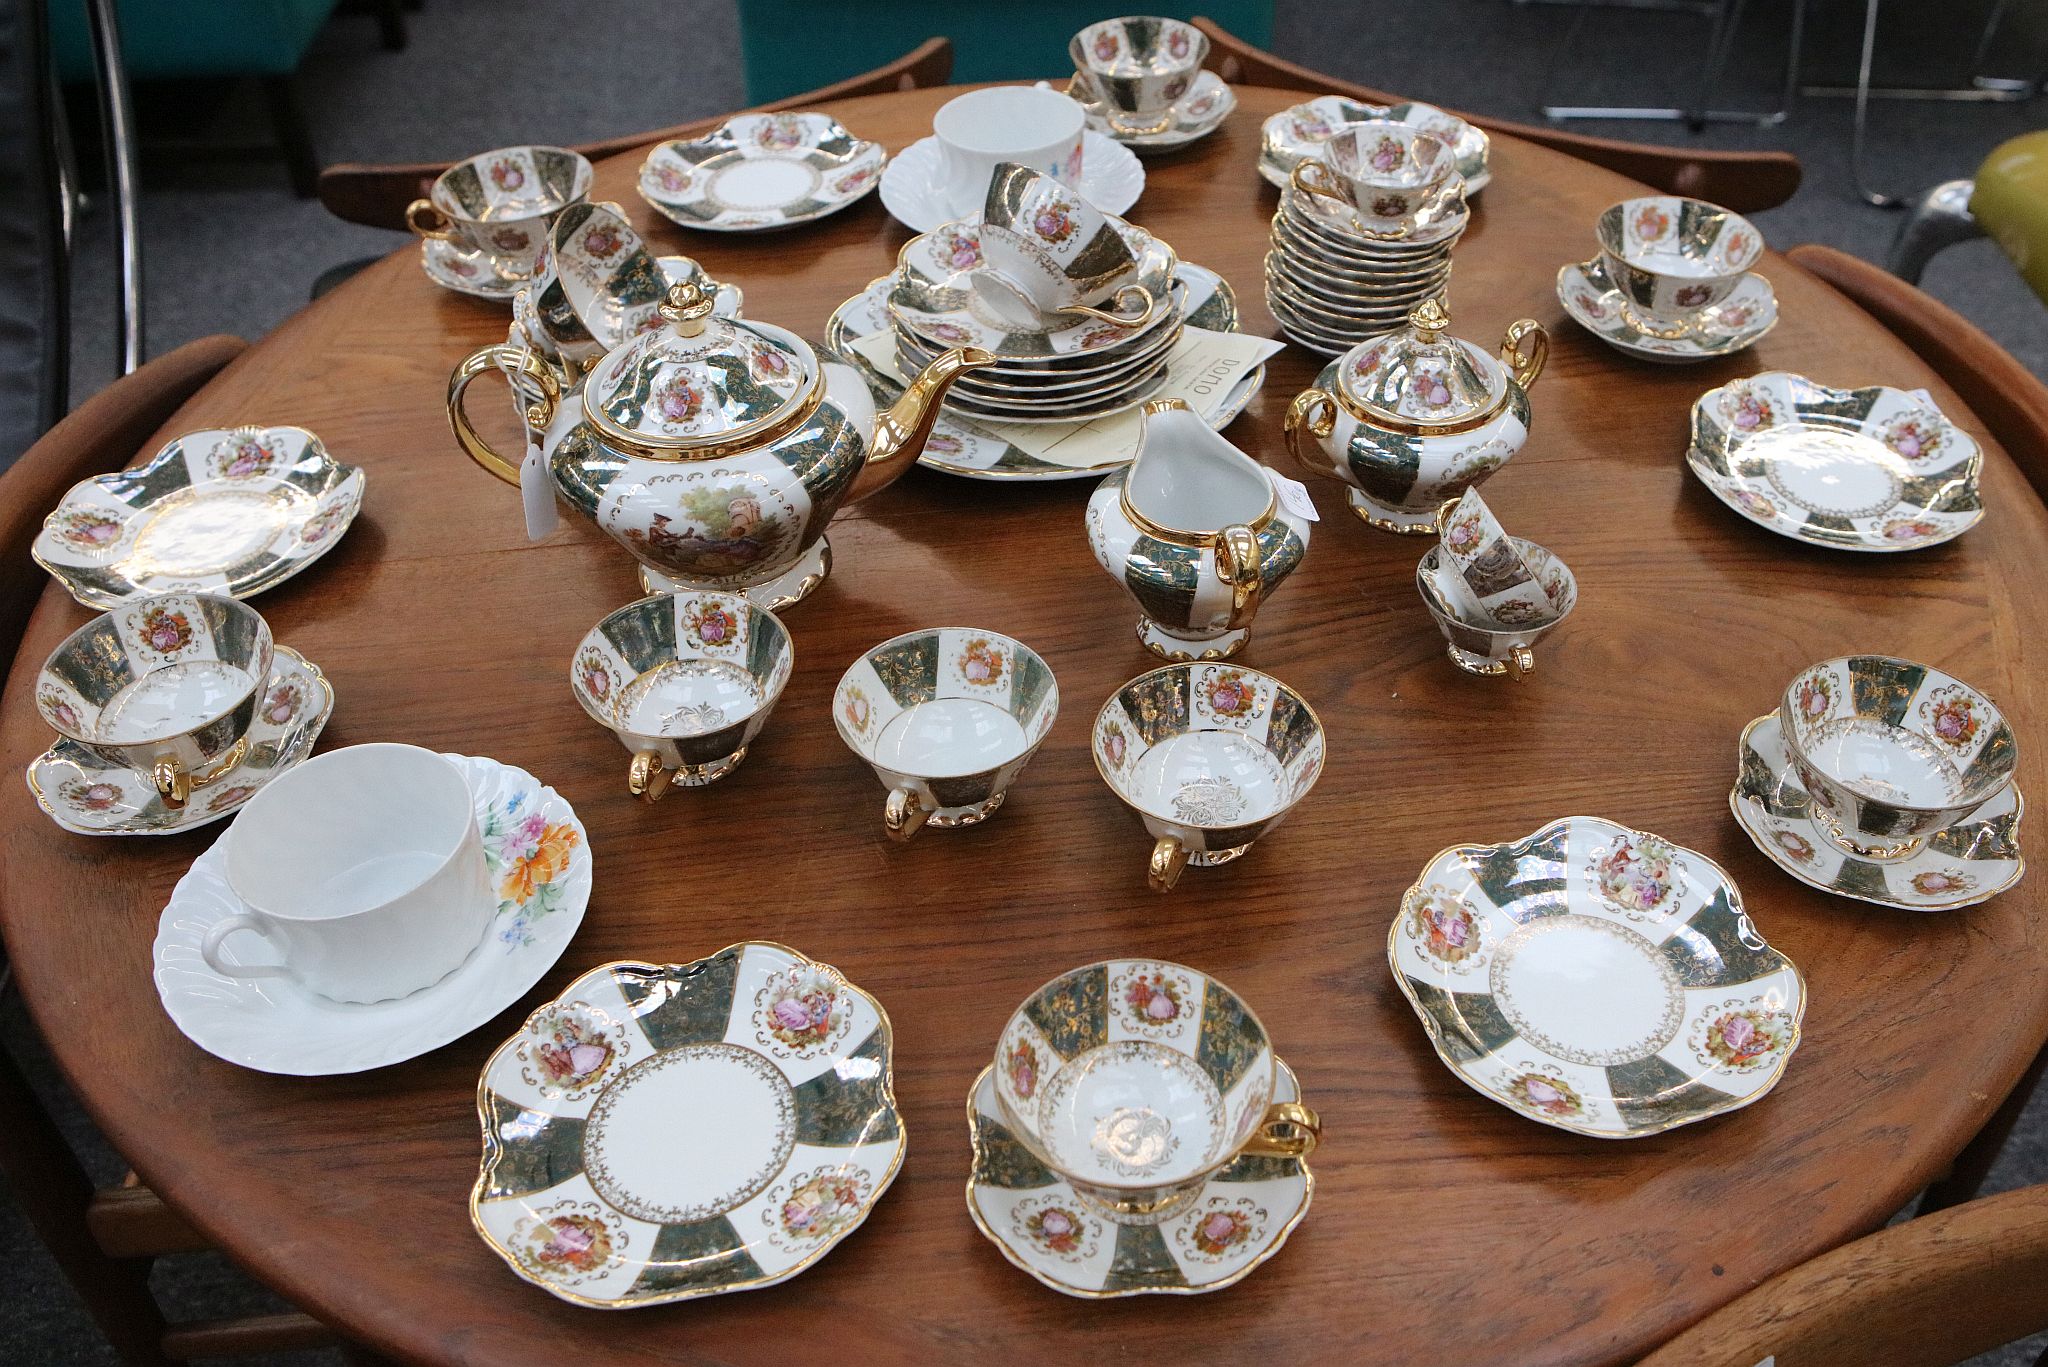 A mid 20th Century German Thuringian part tea service, transfer printed with romantic scenes after